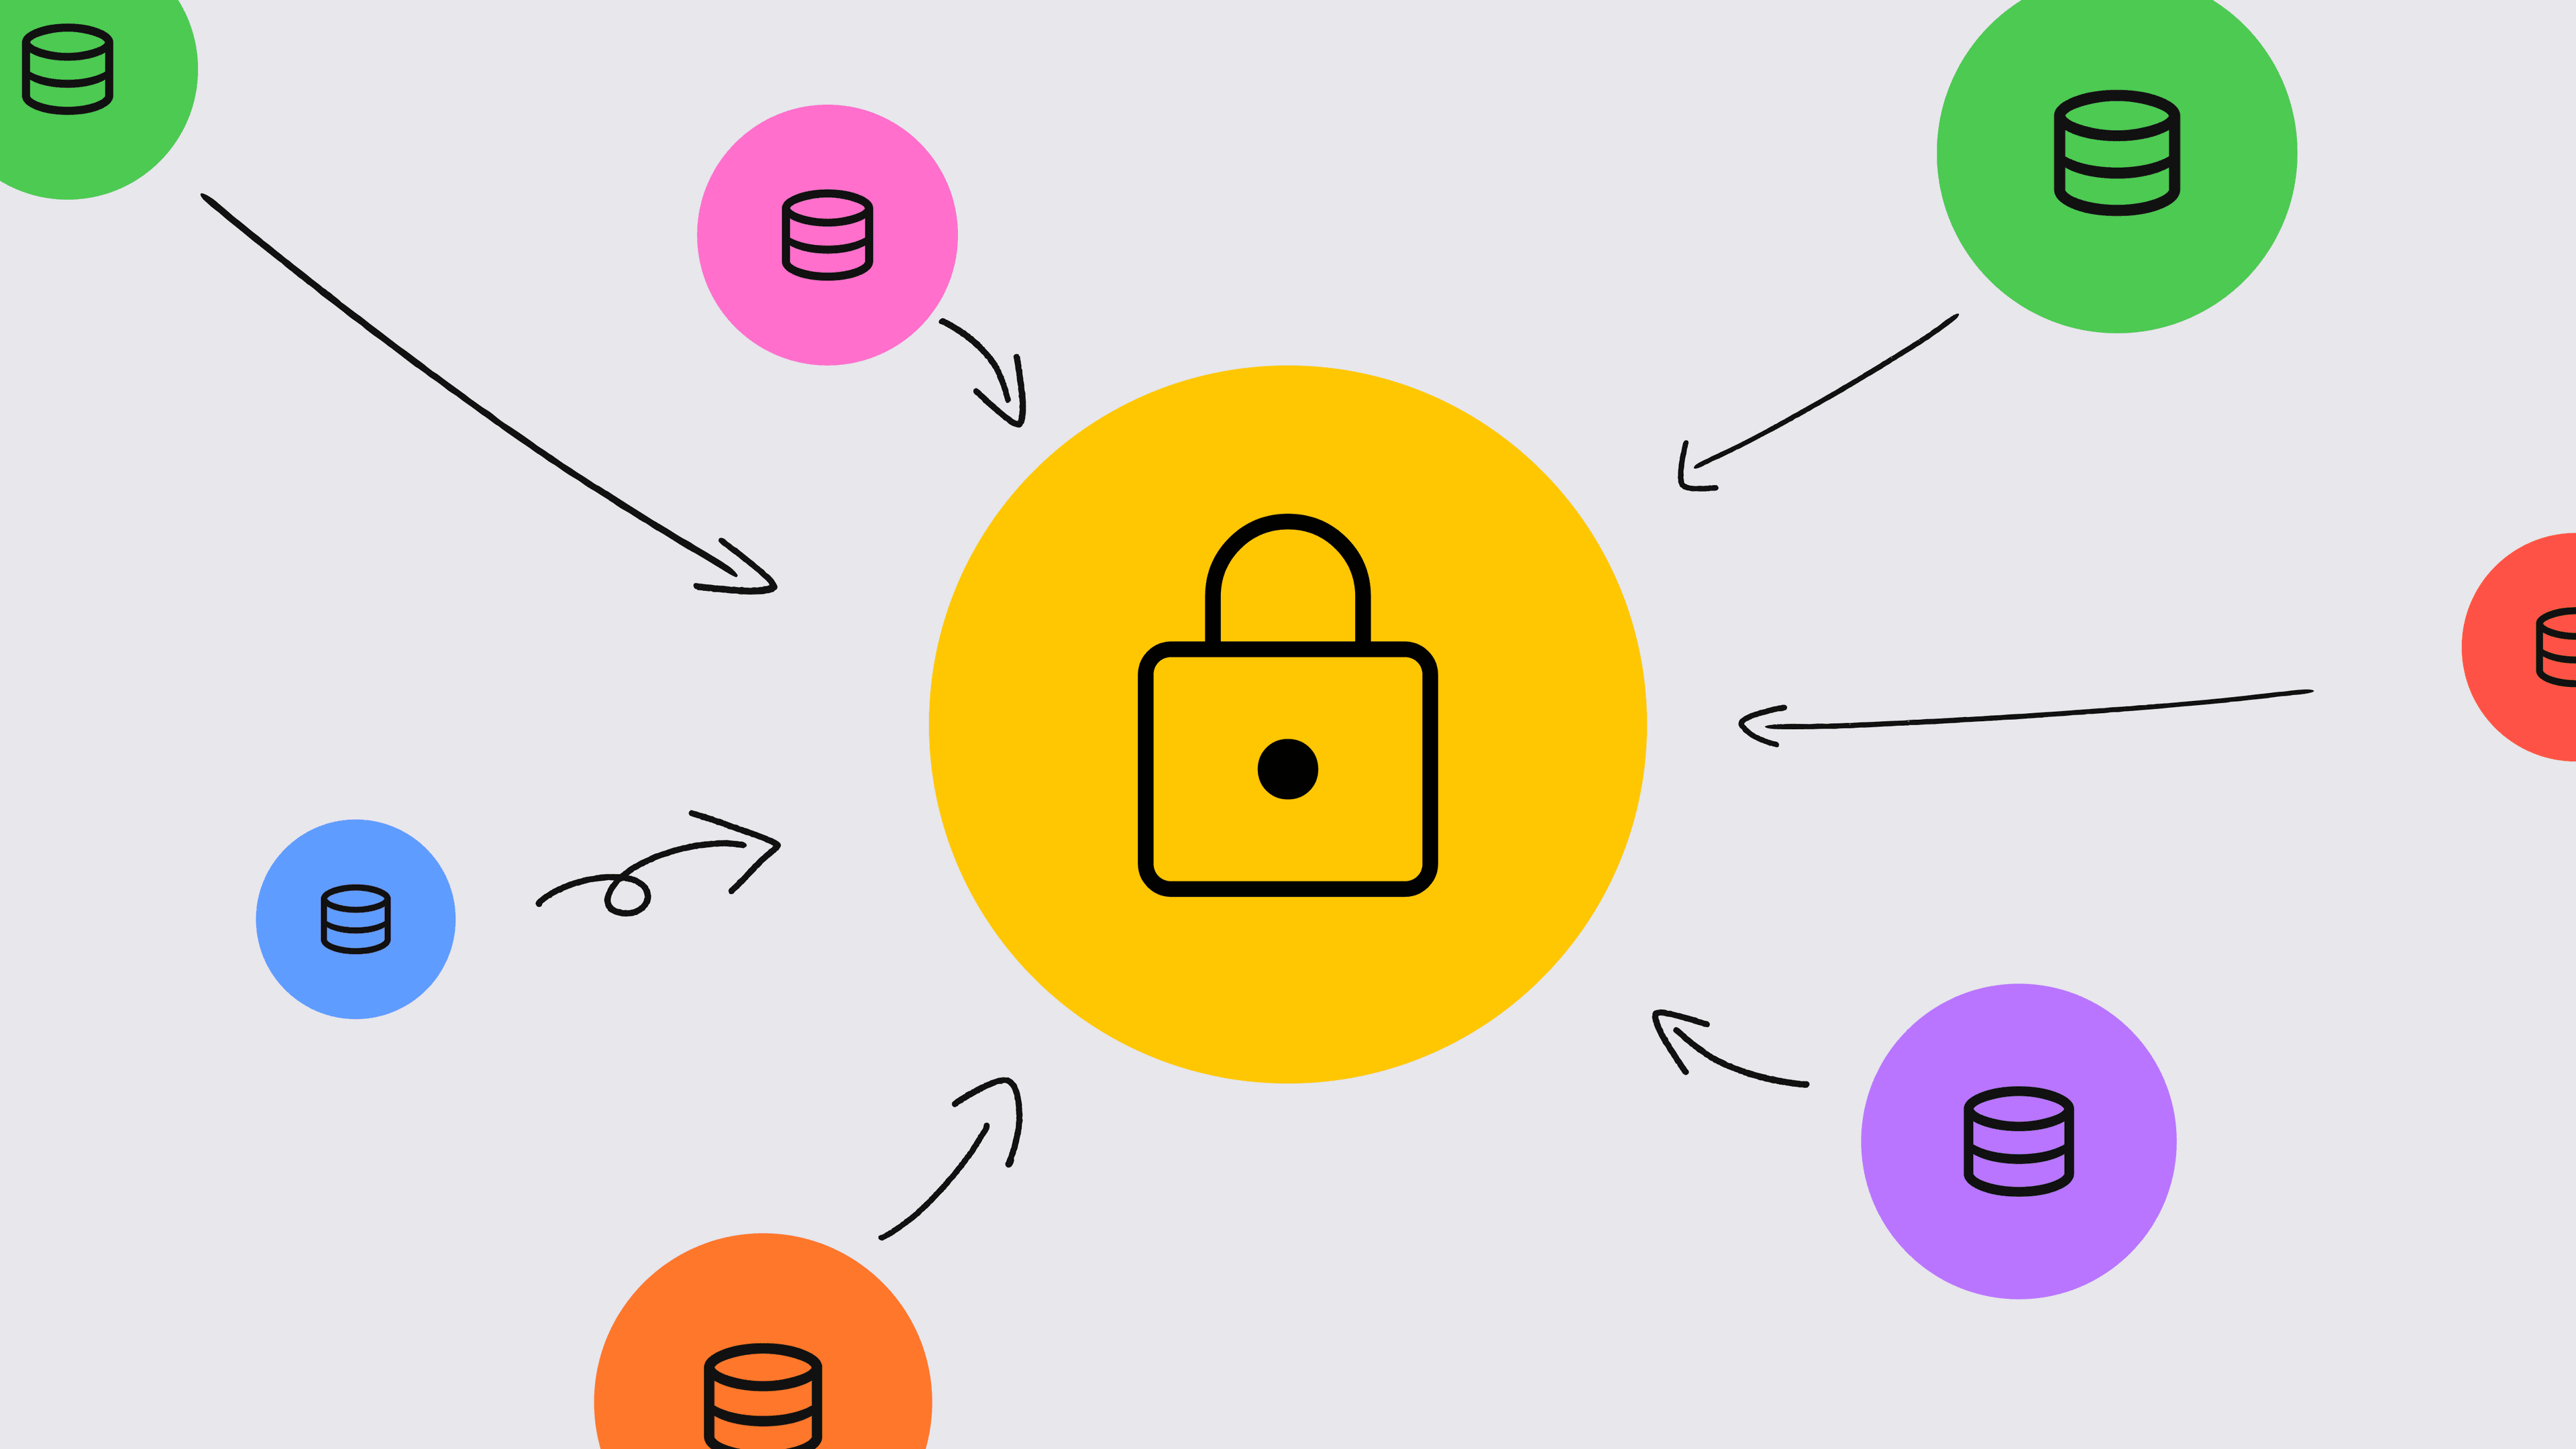 Database icons of various sizes and colors surround a padlock icon, each with an arrow pointing to the central graphic.